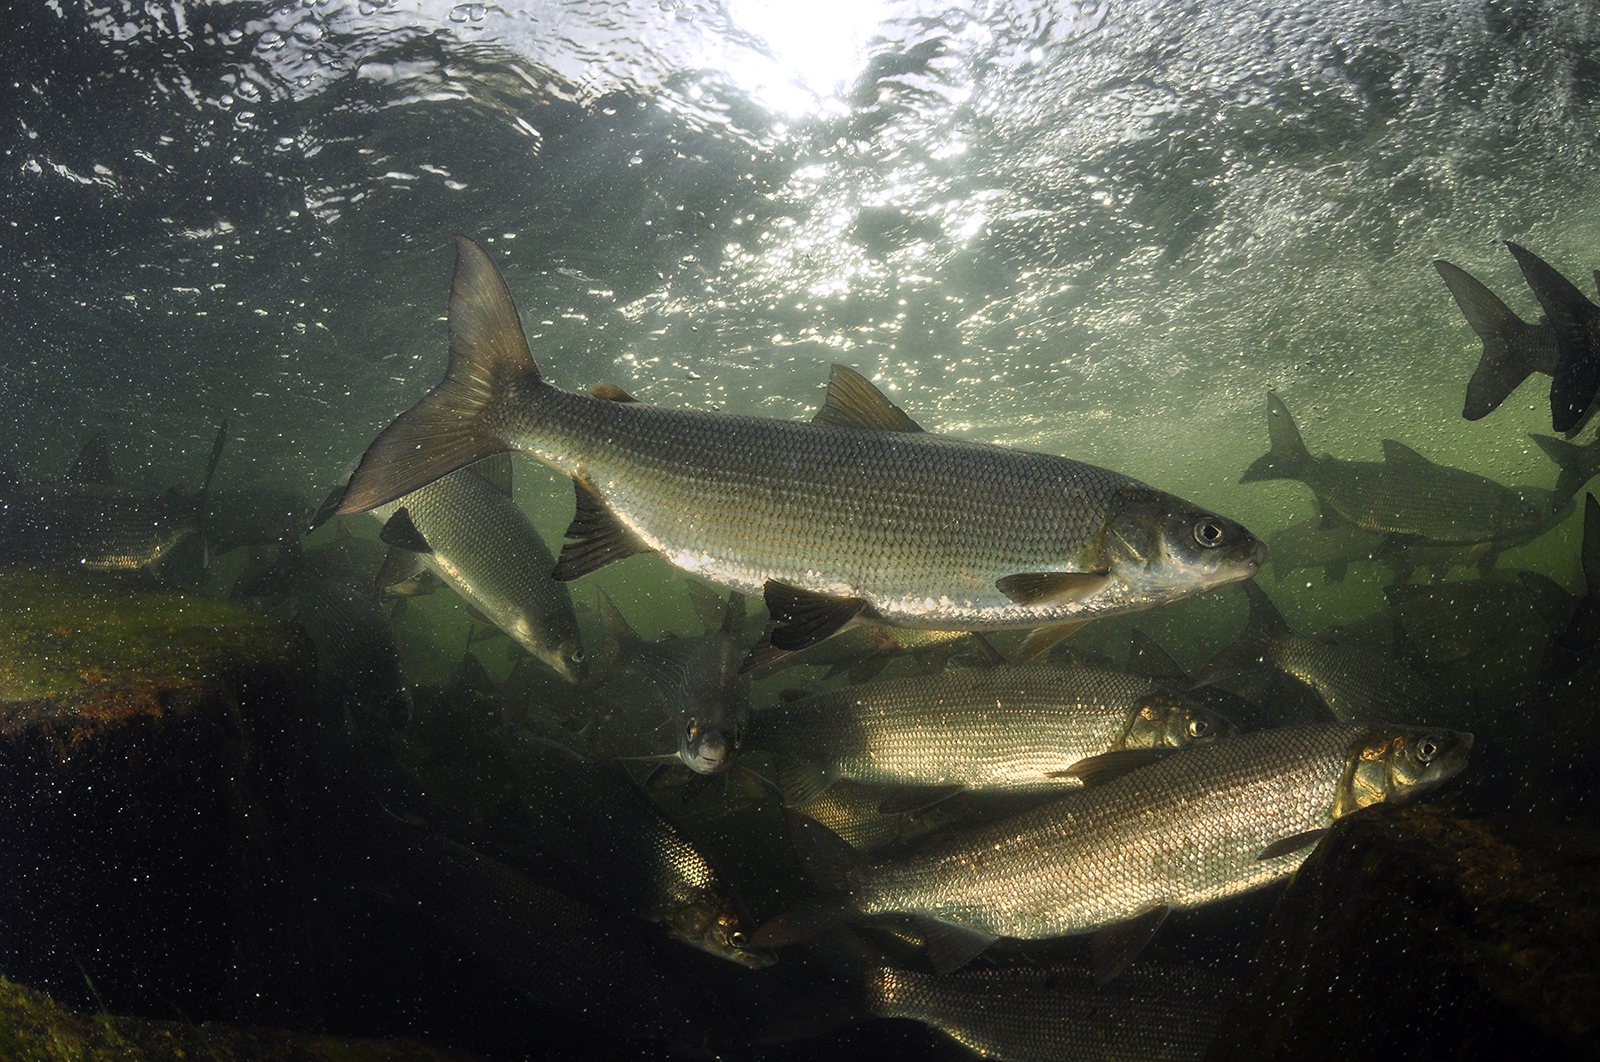 Underwater view of a large school of whitefish, large, shiny silver fish.